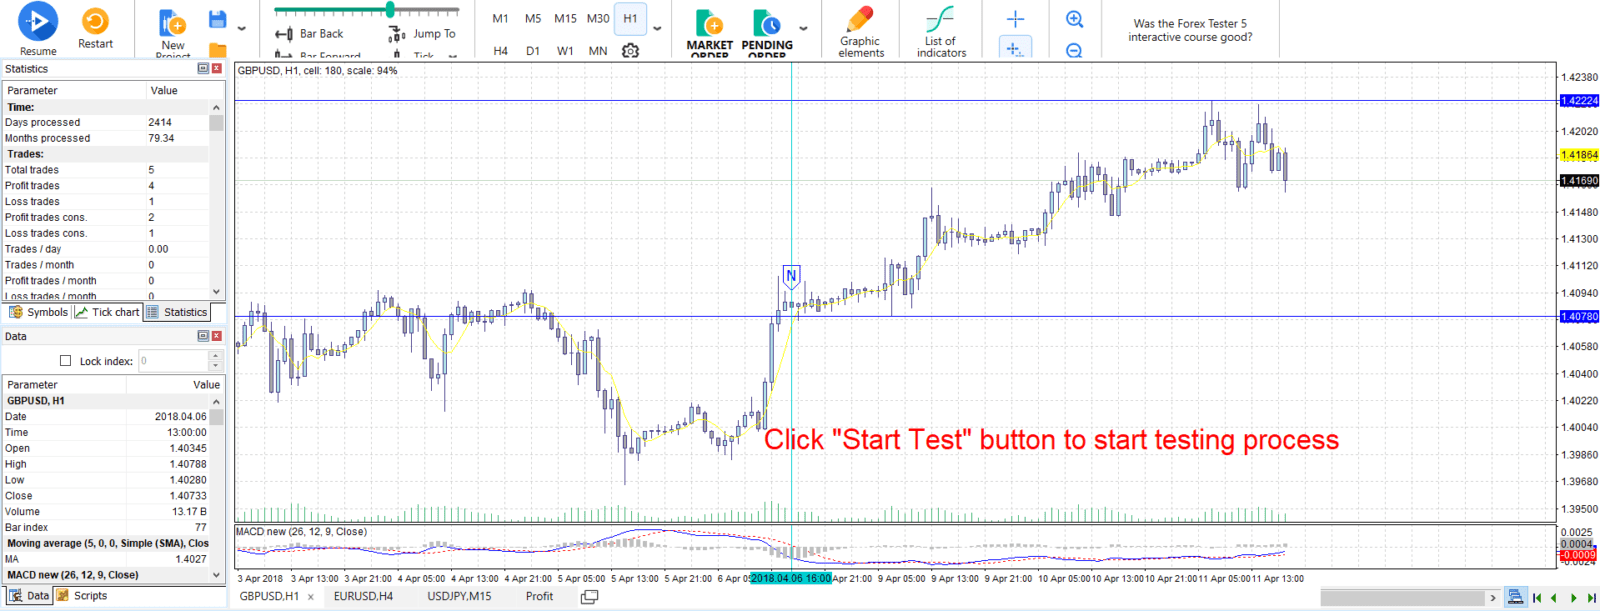 Back testing software for forex forex trading is difficult but enjoyable define